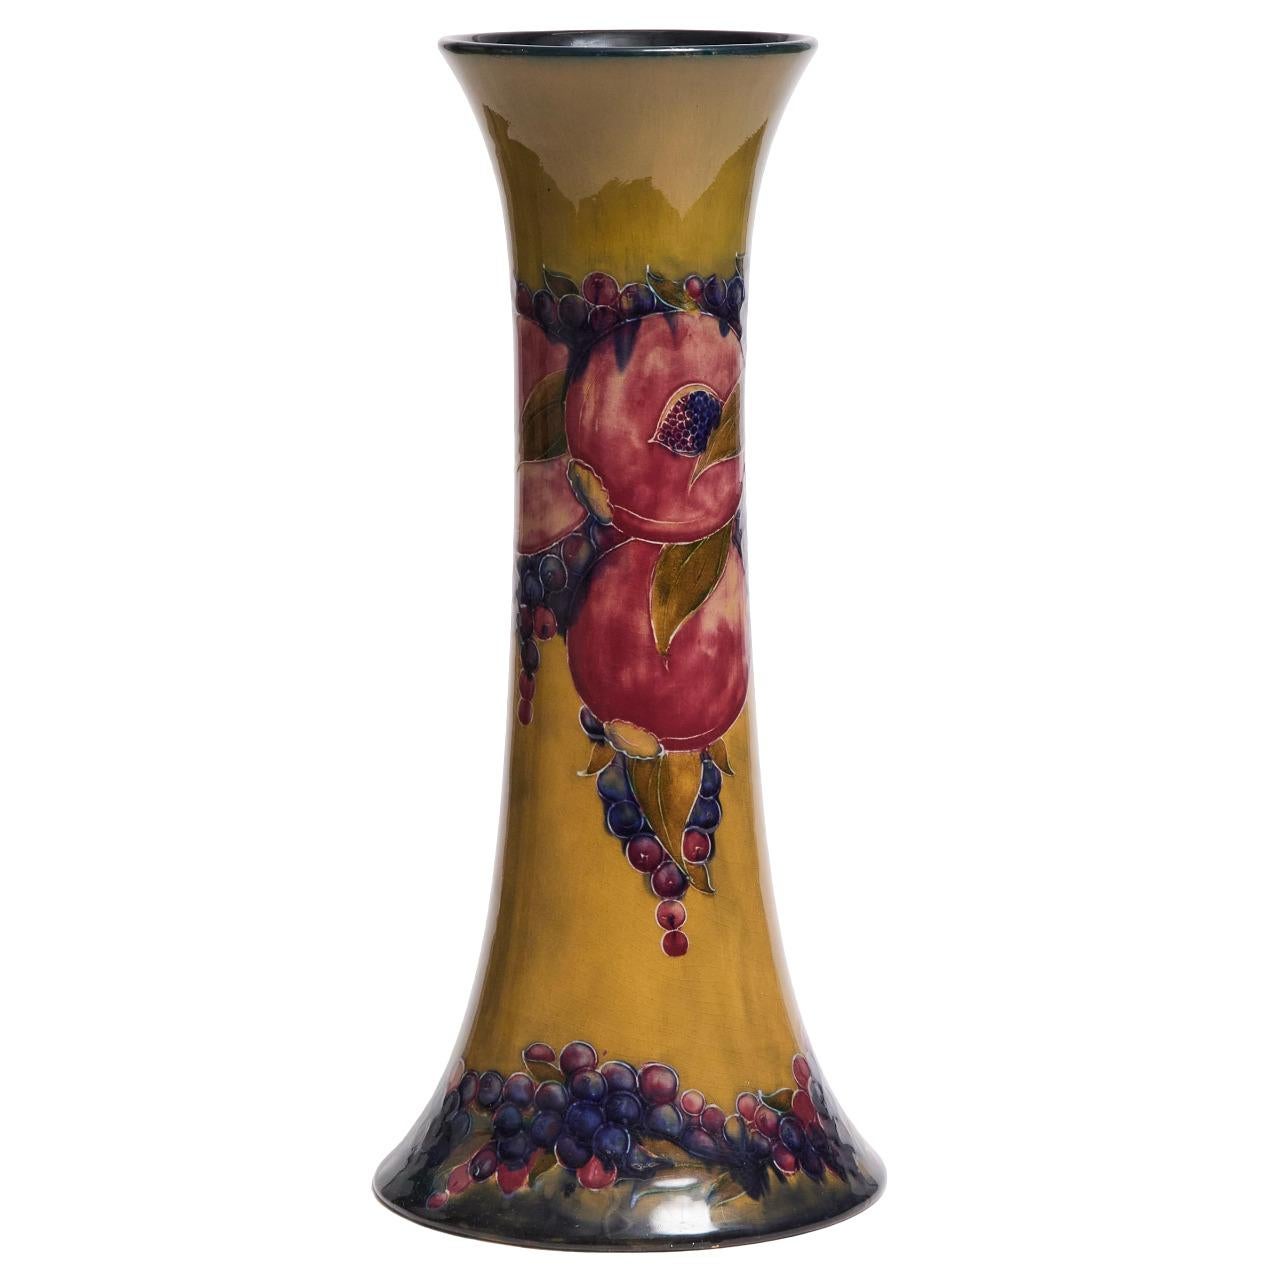 This exquisite vase boasts a stunning pomegranate pattern that dates back to circa 1916/1918. With a restored rim and standing tall at 39 cm, this piece is sure to impress. The vase comes complete with impressed Burslem marks and a painted signature